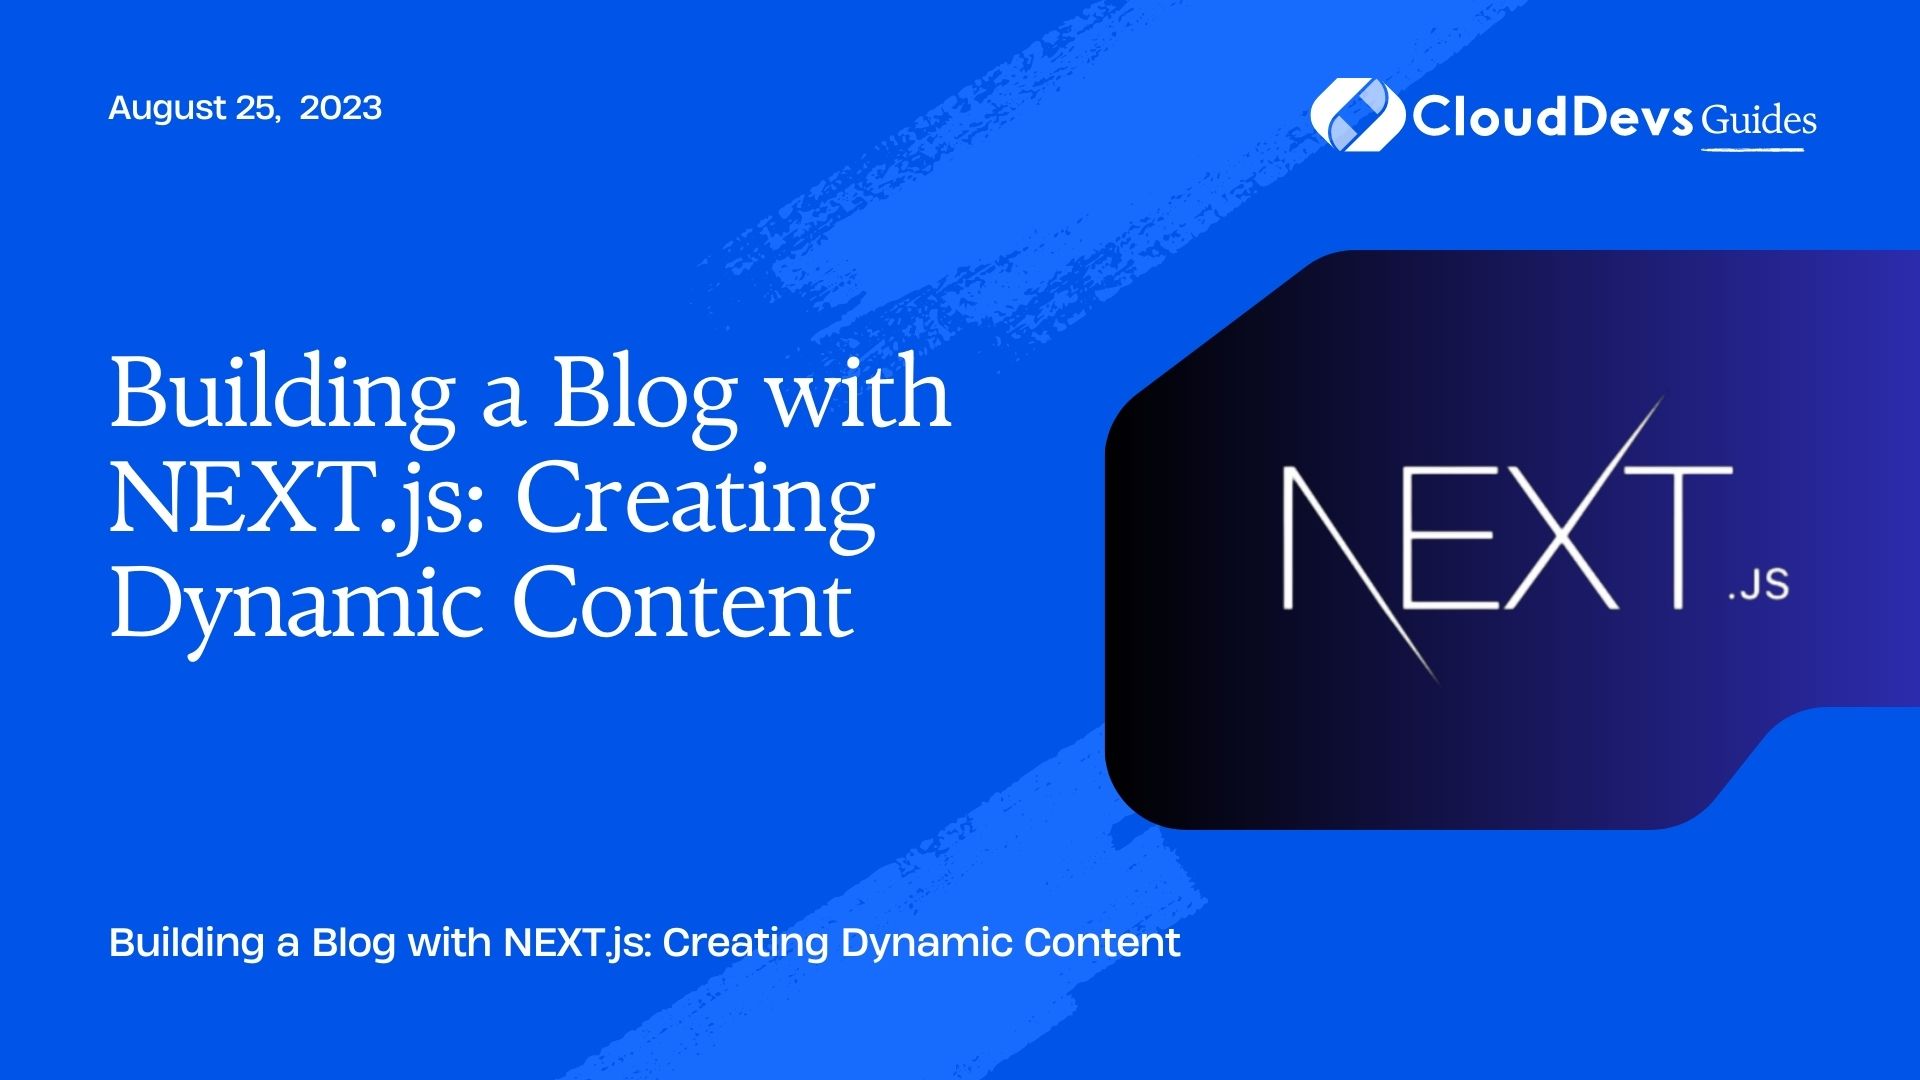 Building a Blog with NEXT.js: Creating Dynamic Content